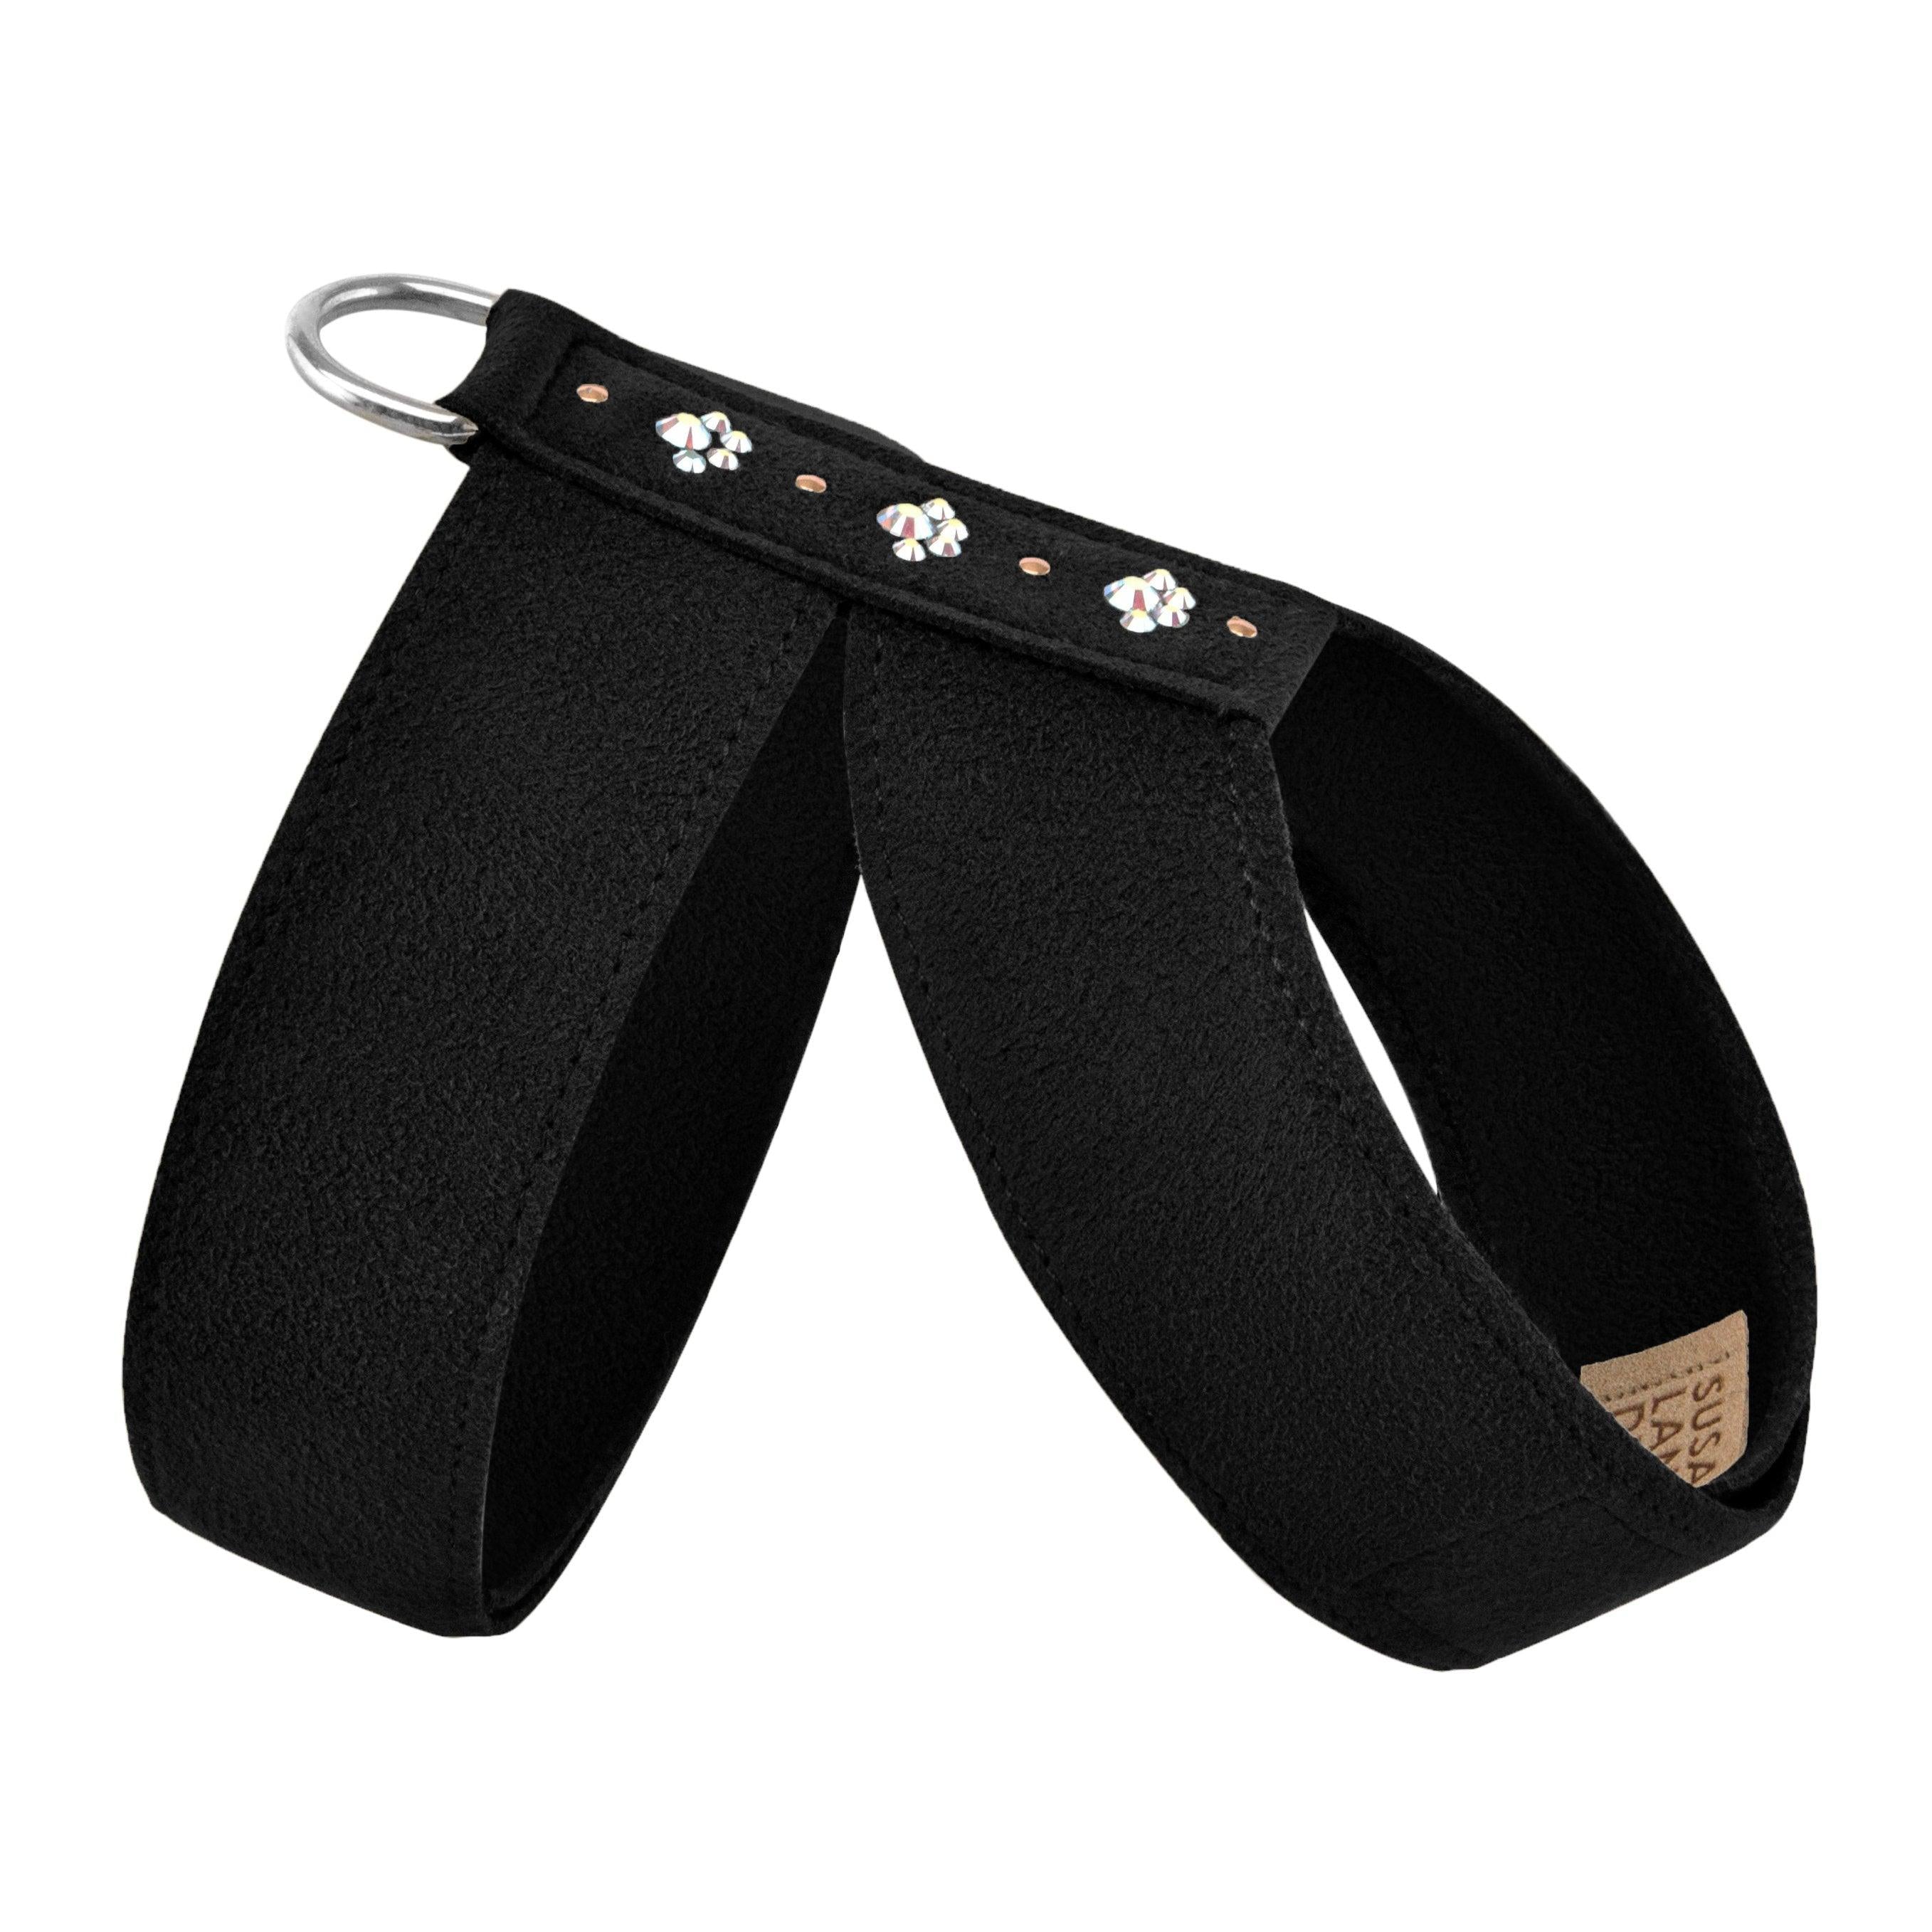 Crystal Paws Tinkie Harness - Rocky & Maggie's Pet Boutique and Salon